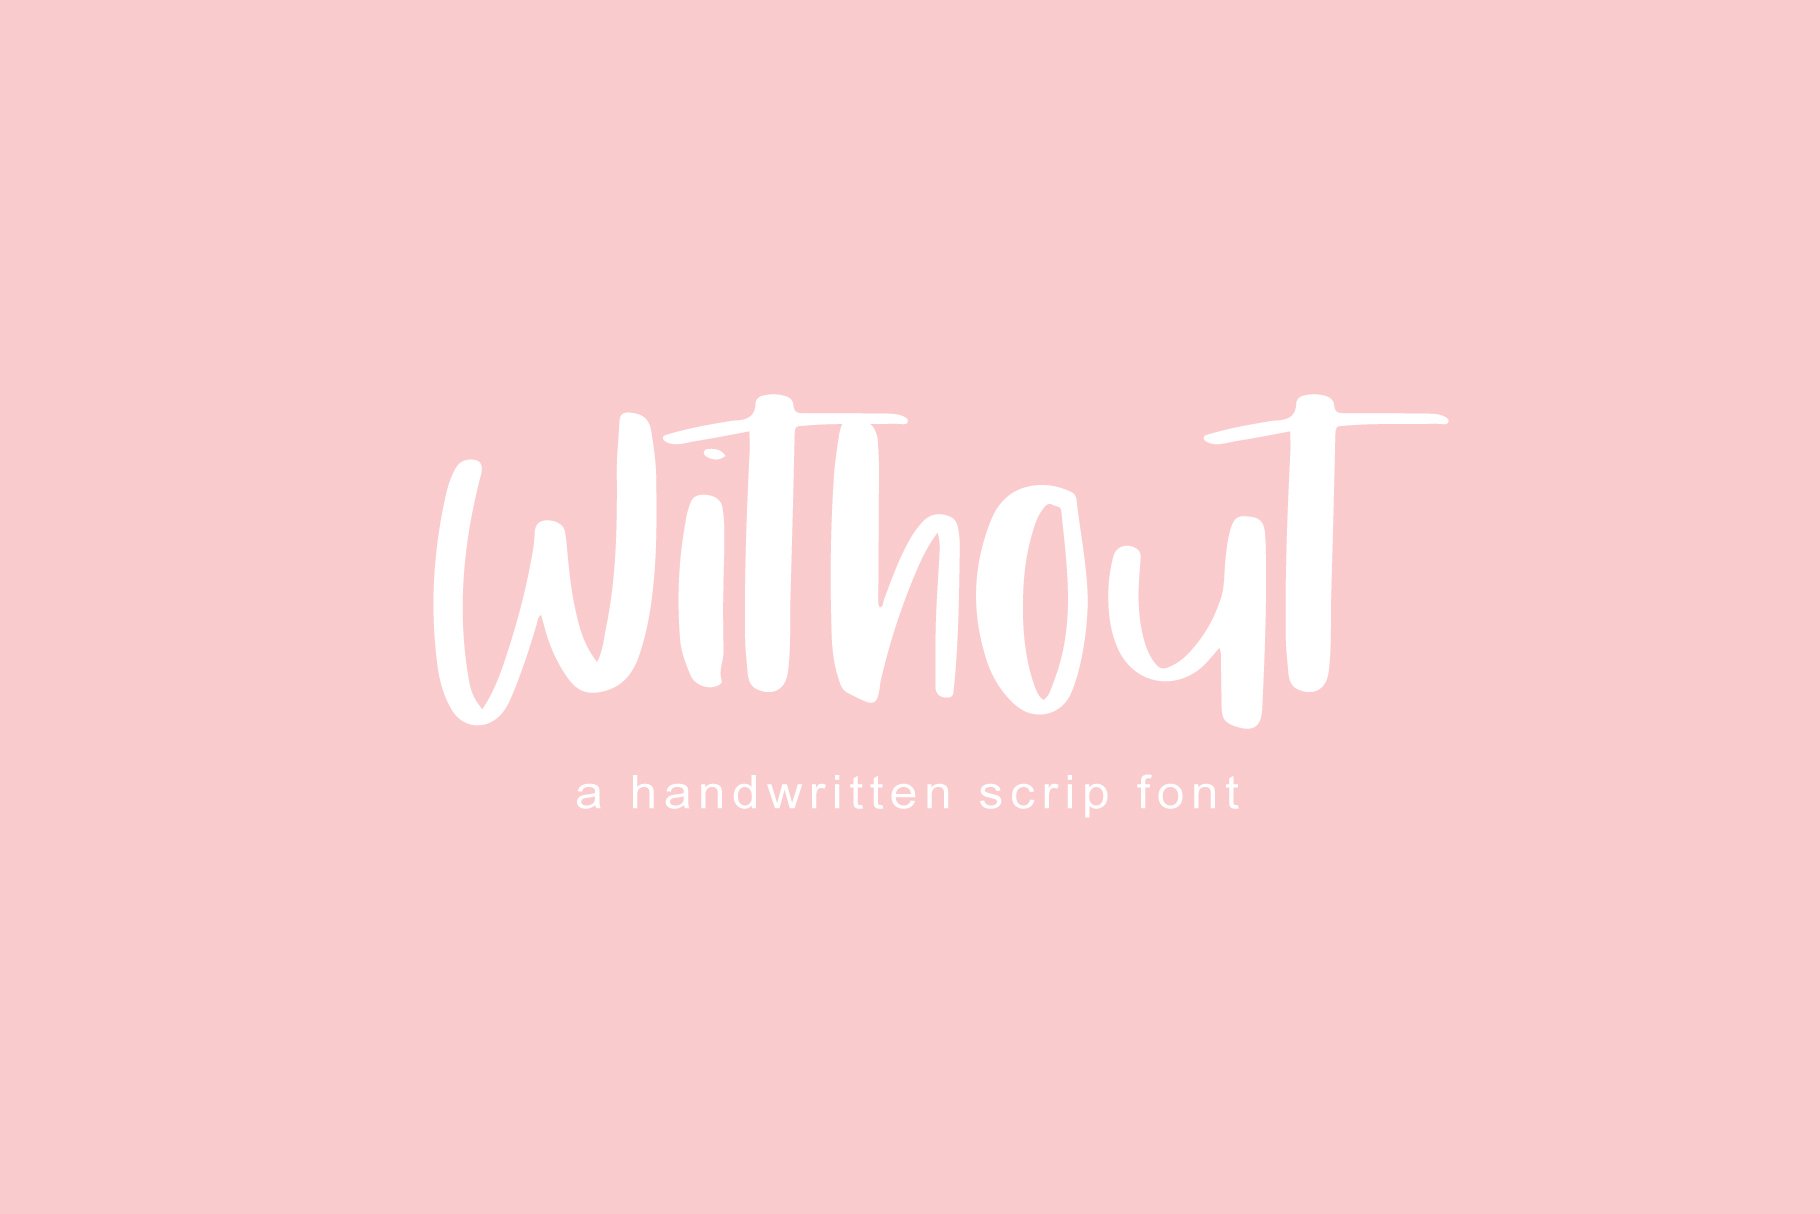 Without | Handwritten Font cover image.